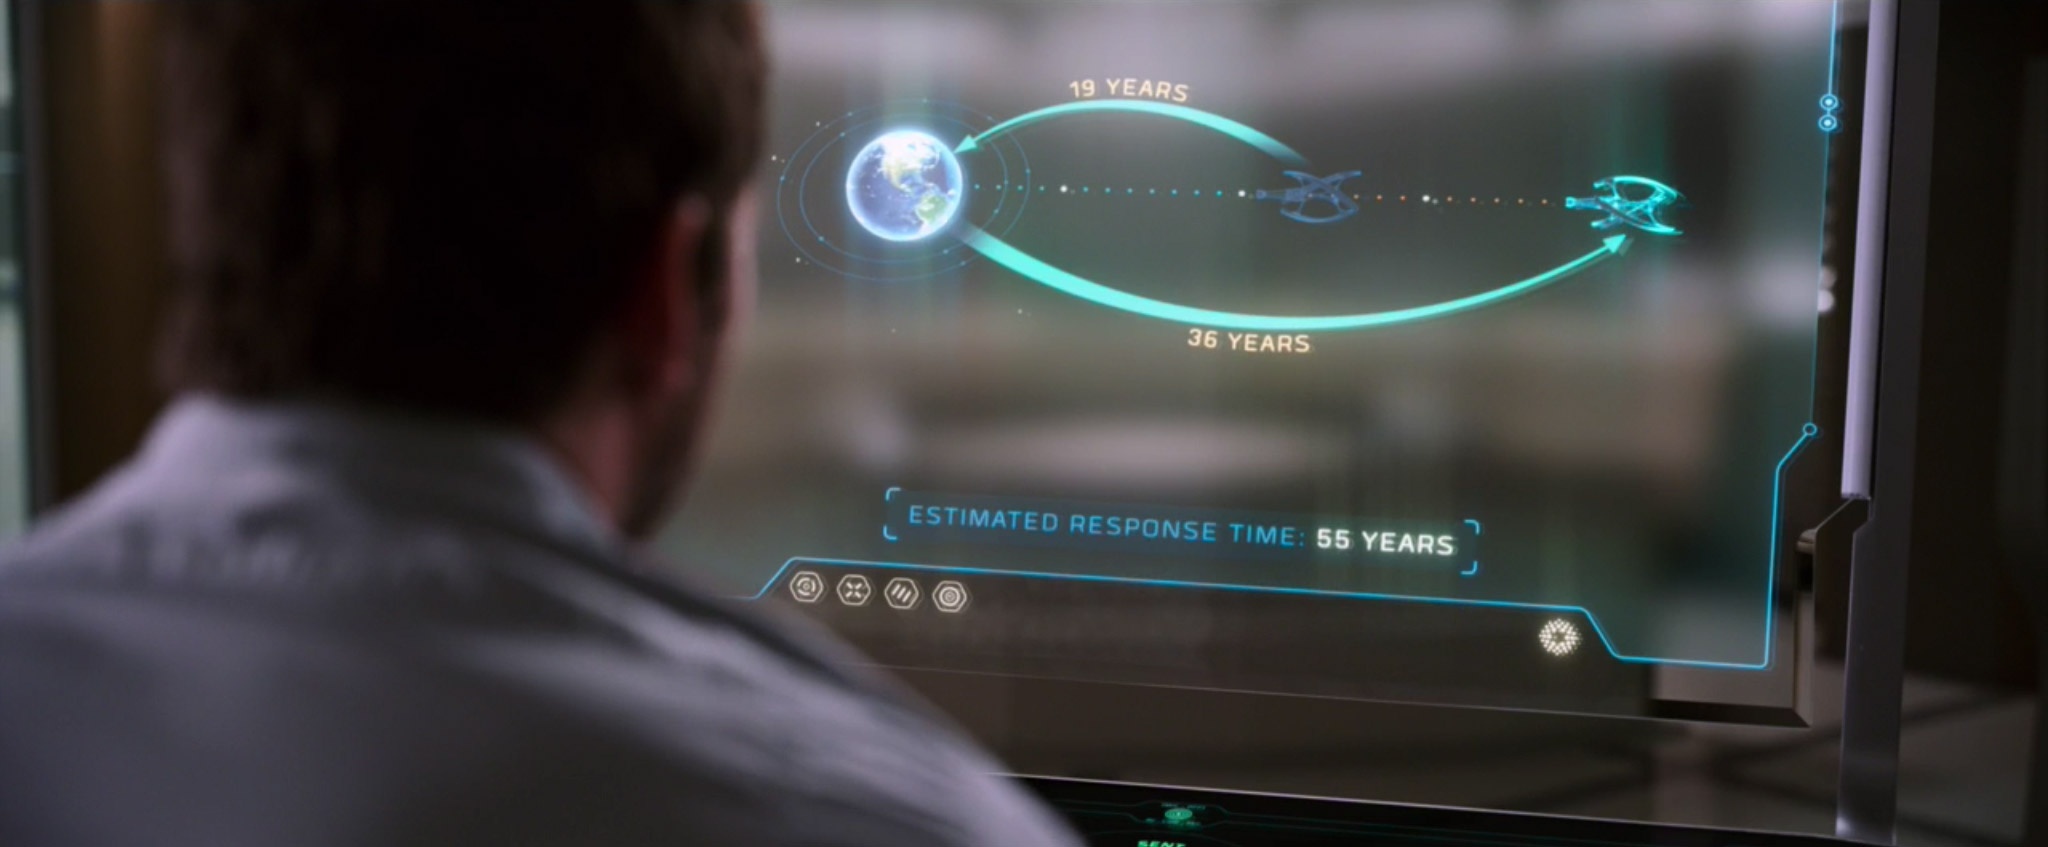 Computer interface from the film Passengers